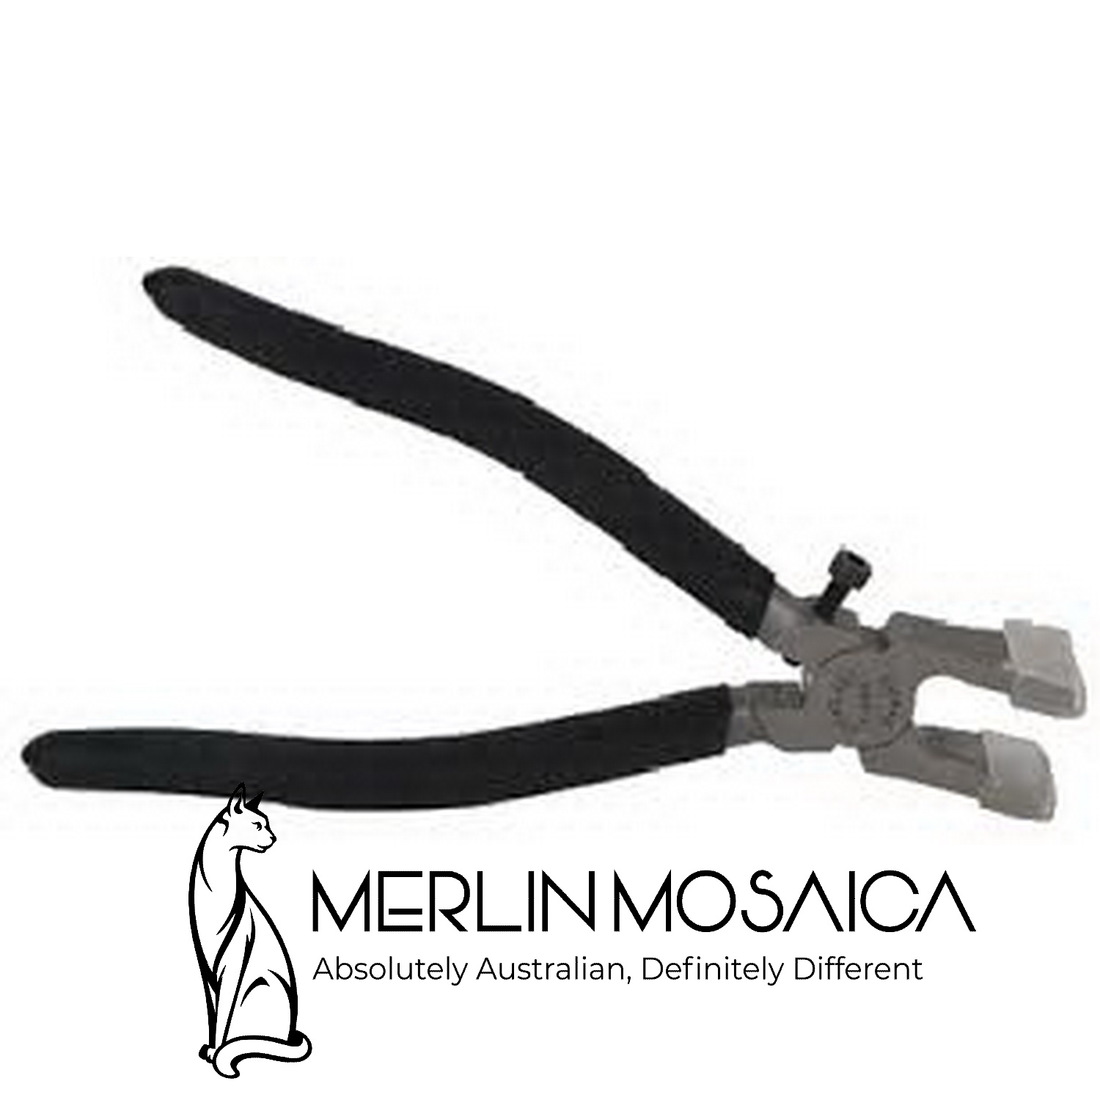 Leponitt 8 inch Running Pliers - The Avenue Stained Glass